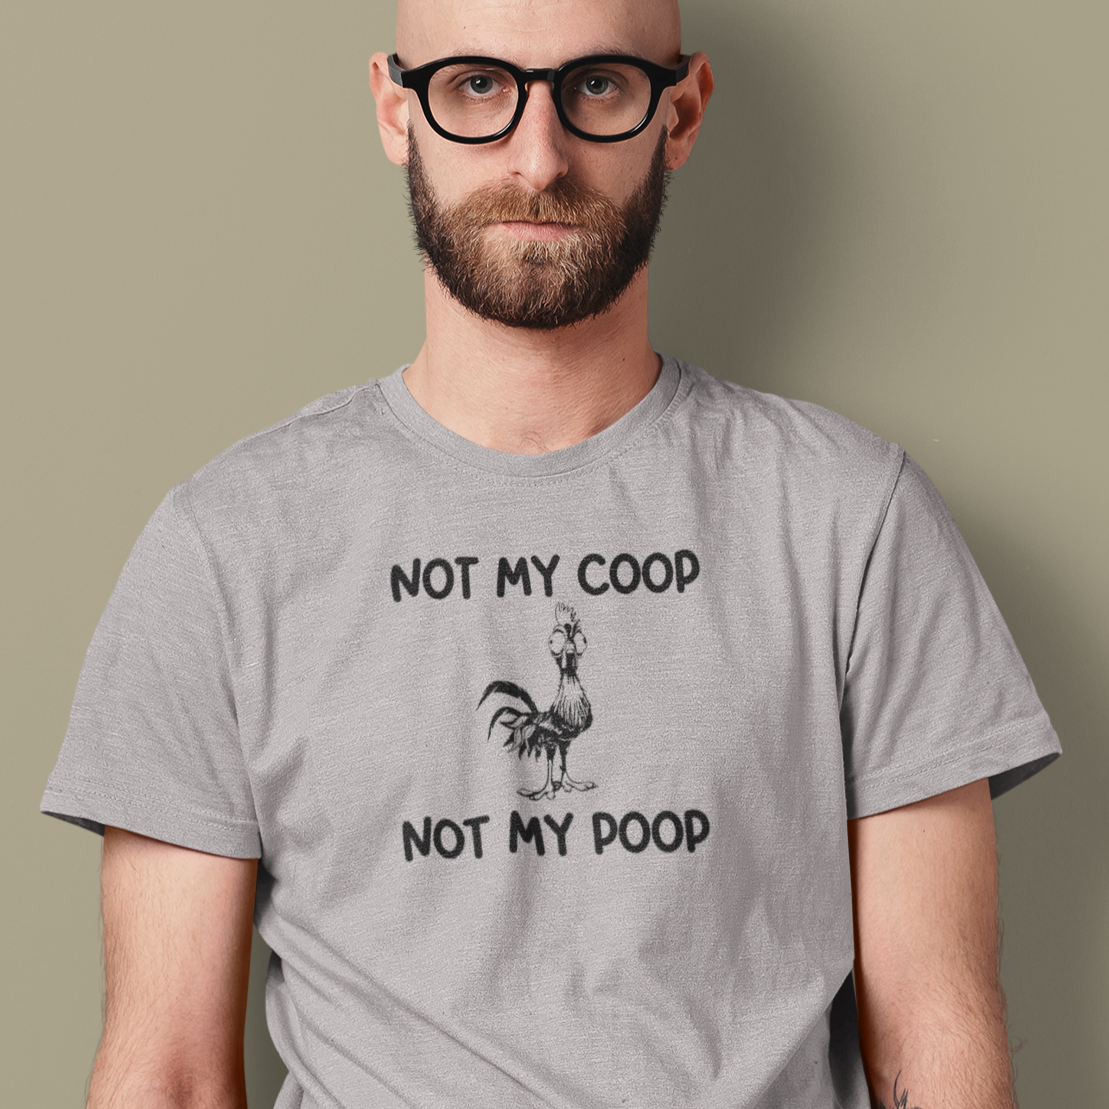 not-my-coop-not-my-poop-athletic-heather-grey-t-shirt-chicken-funny-animal-tee-mockup-of-a-bearded-man-with-arm-tattoos